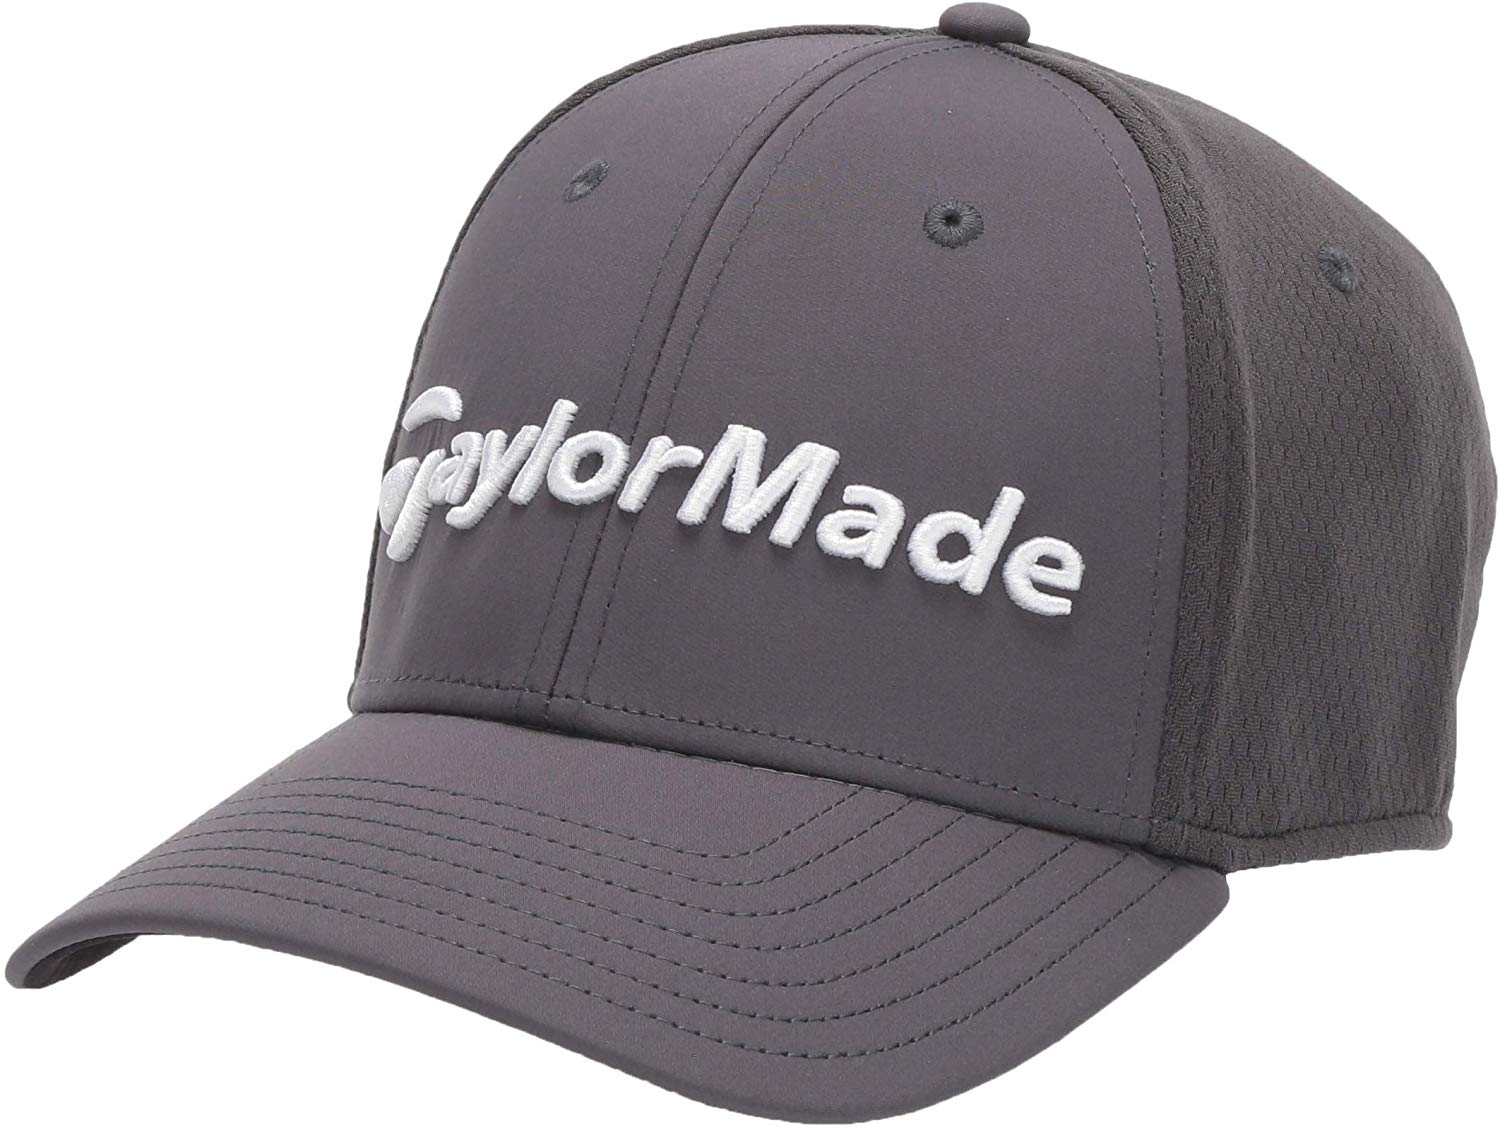 Taylormade Mens 2019 Performance Cage Golf Hats